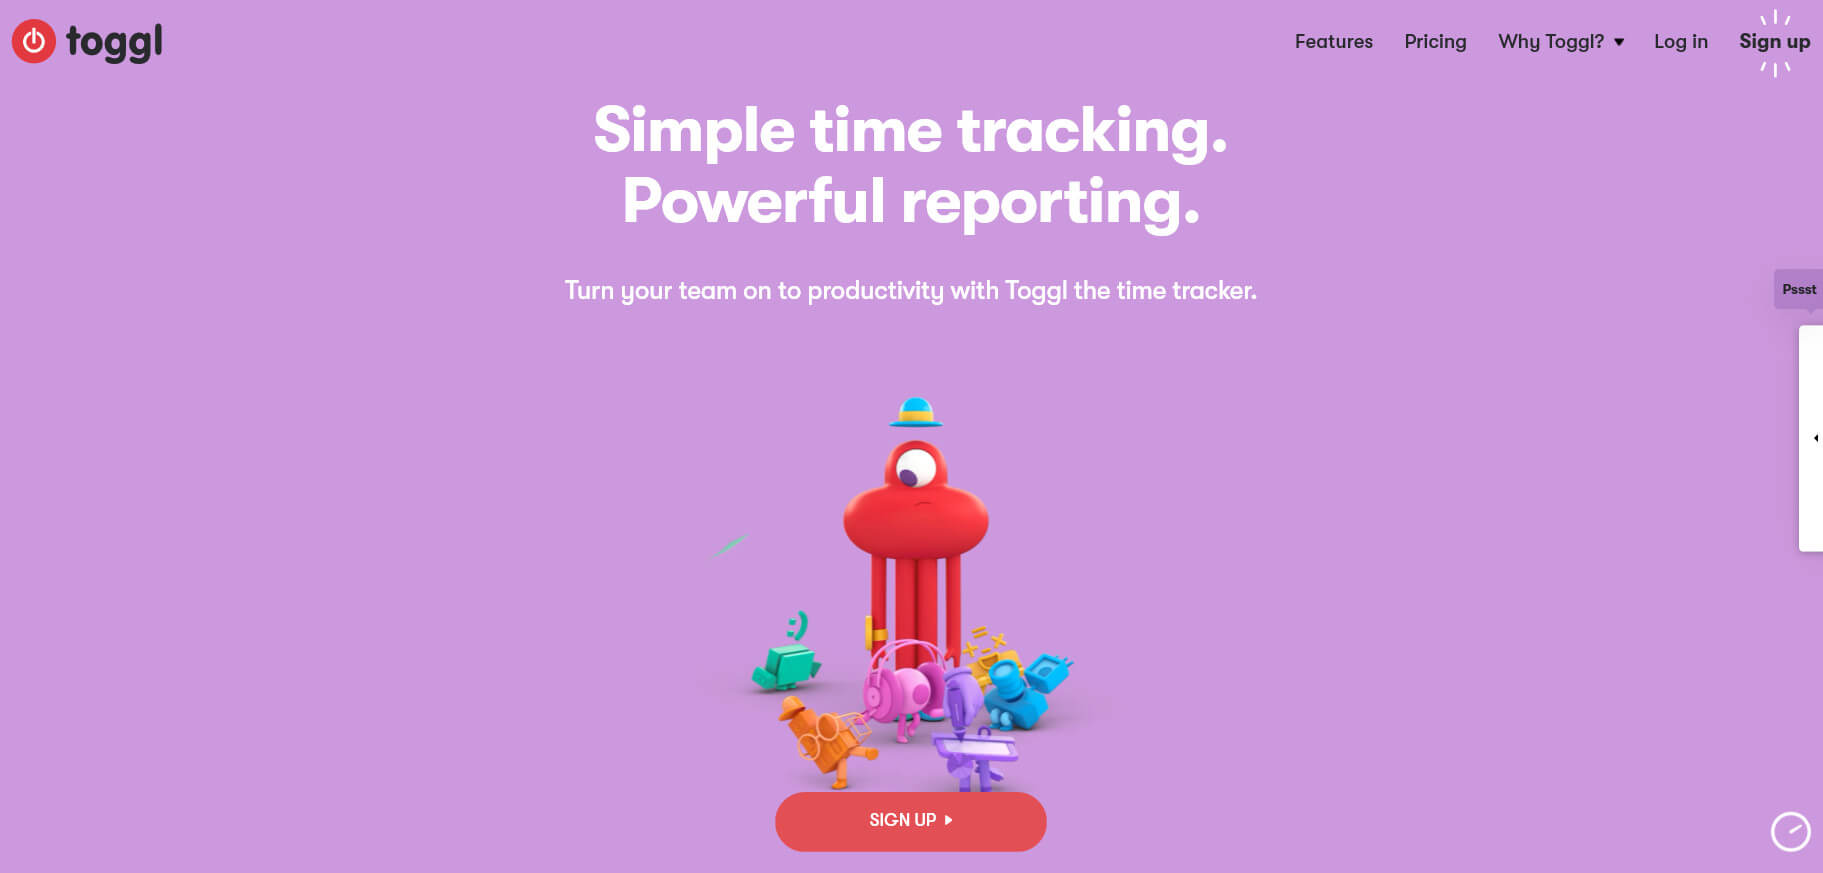 The Toggl homepage.